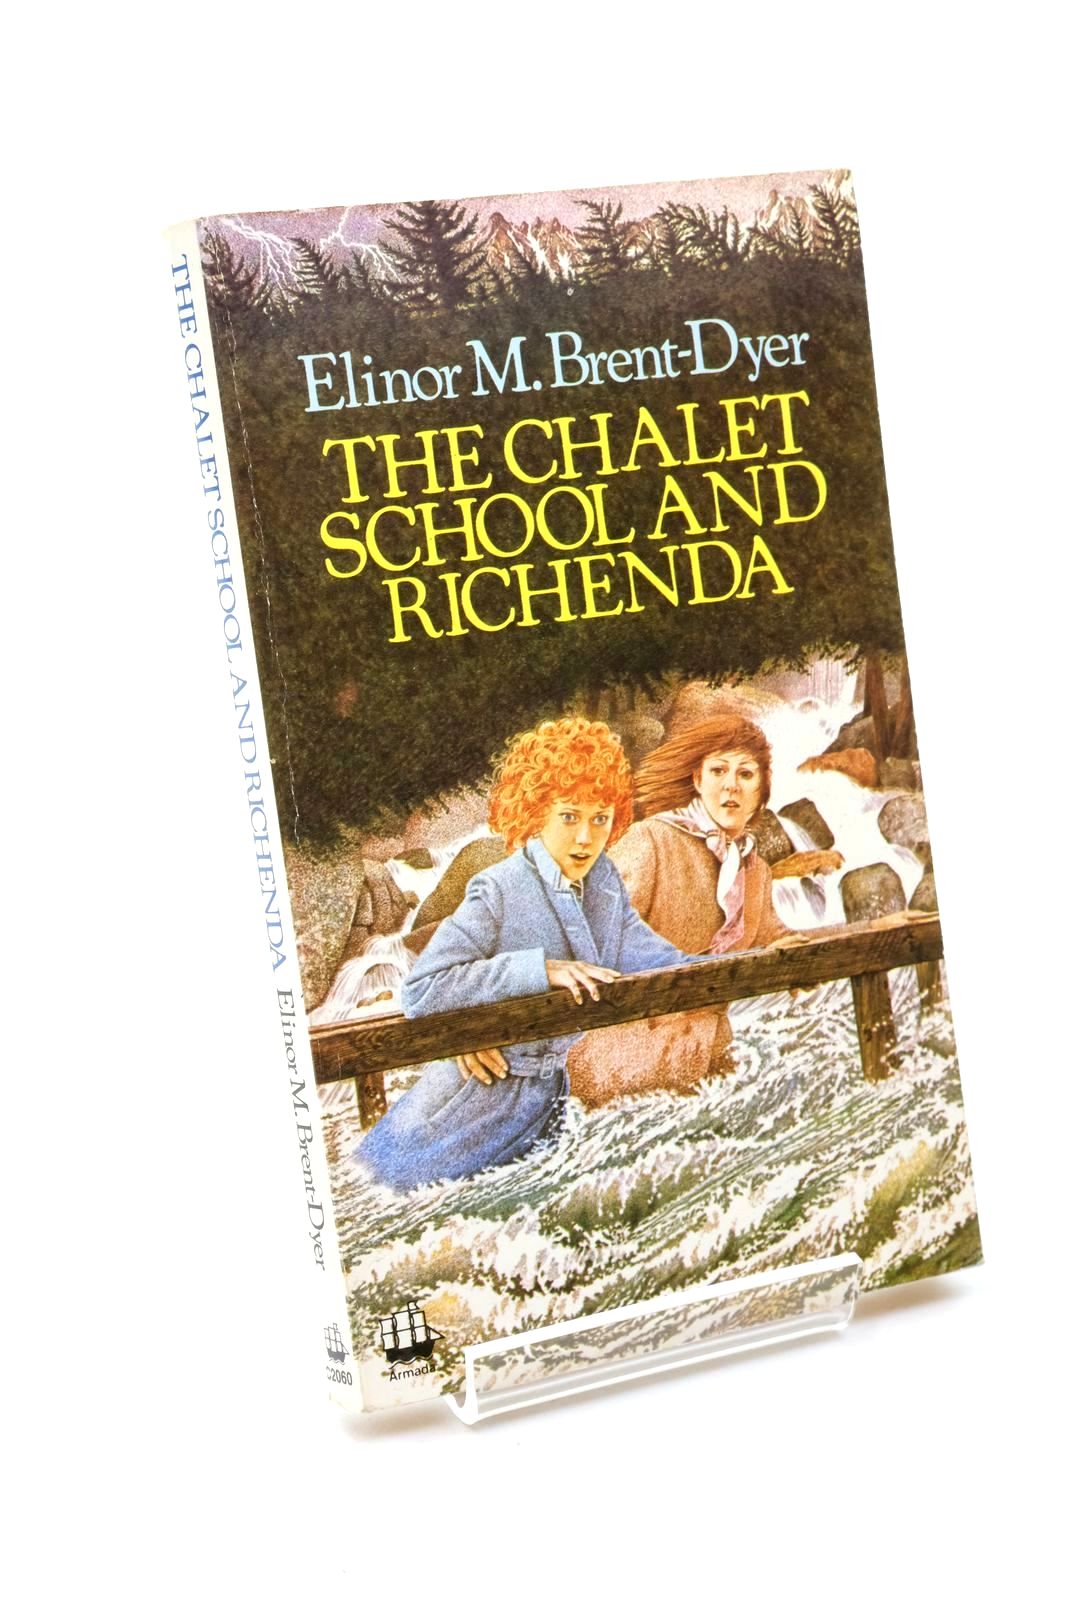 Photo of THE CHALET SCHOOL AND RICHENDA written by Brent-Dyer, Elinor M. published by Armada (STOCK CODE: 1322577)  for sale by Stella & Rose's Books